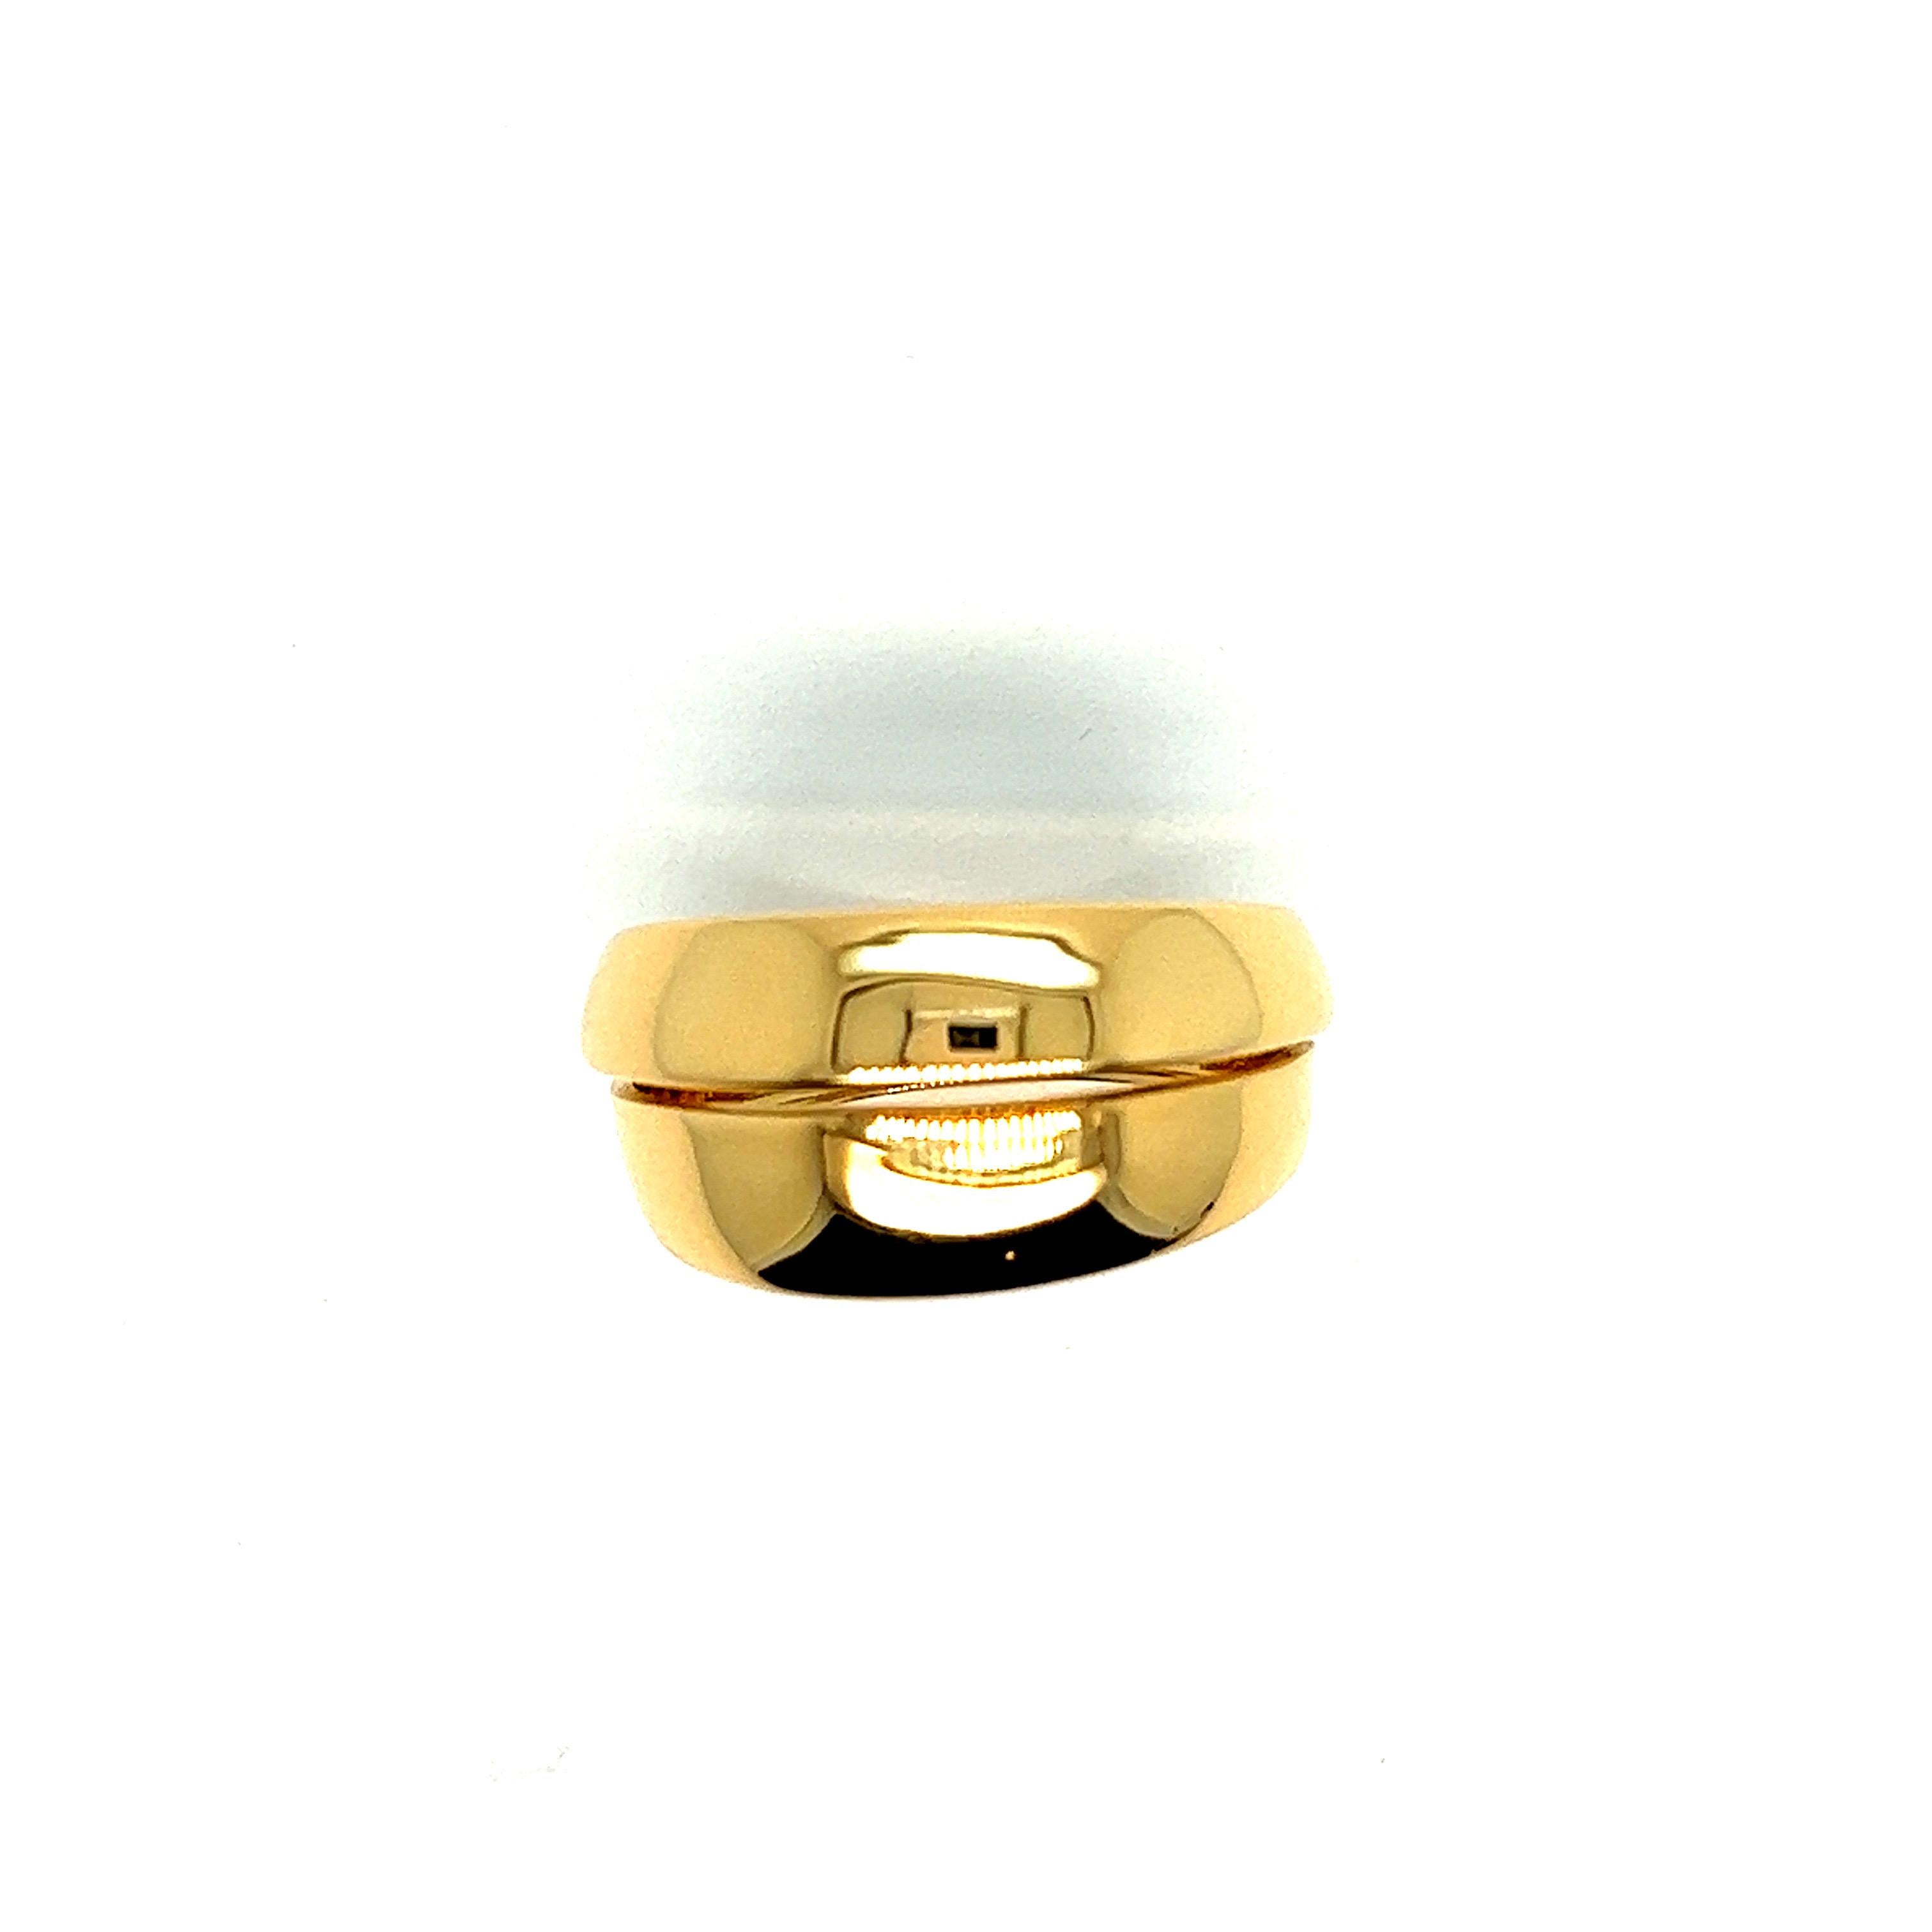 Contemporary French Ring with Middle Opening 18 Carat Yellow Gold